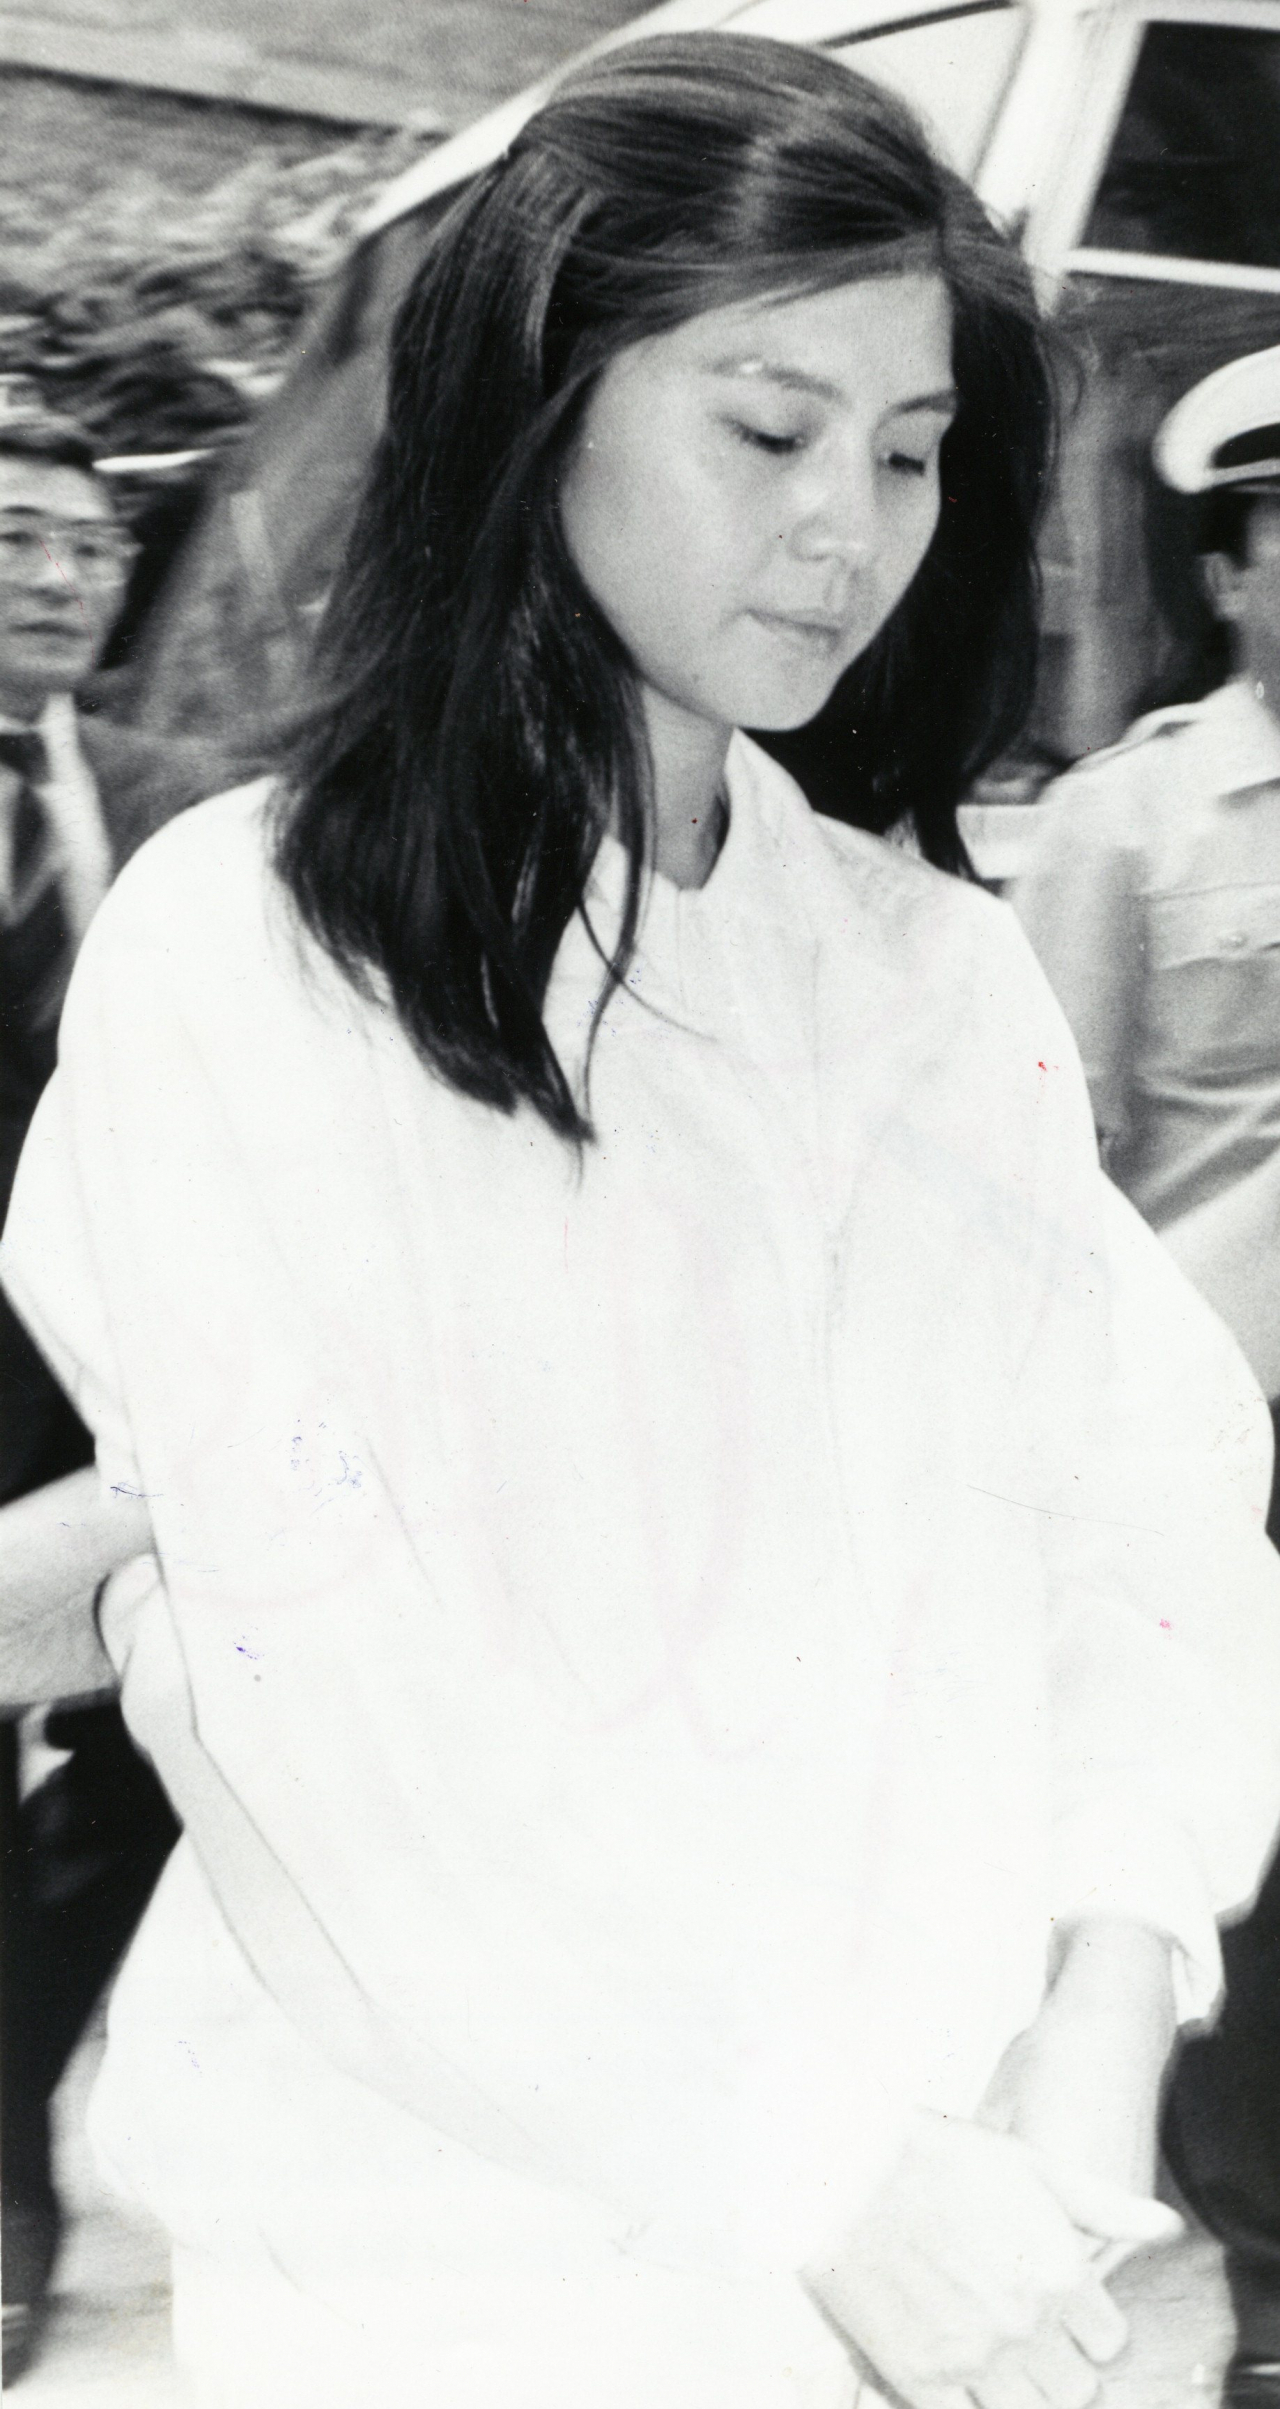 Kim Hyon-hui, one of the two North Korean agents behind the 1987 bombing of Korean Air Flight 858, attends a court hearing in Seoul in this file photo dated July 22, 1989. (The Korea Herald DB)